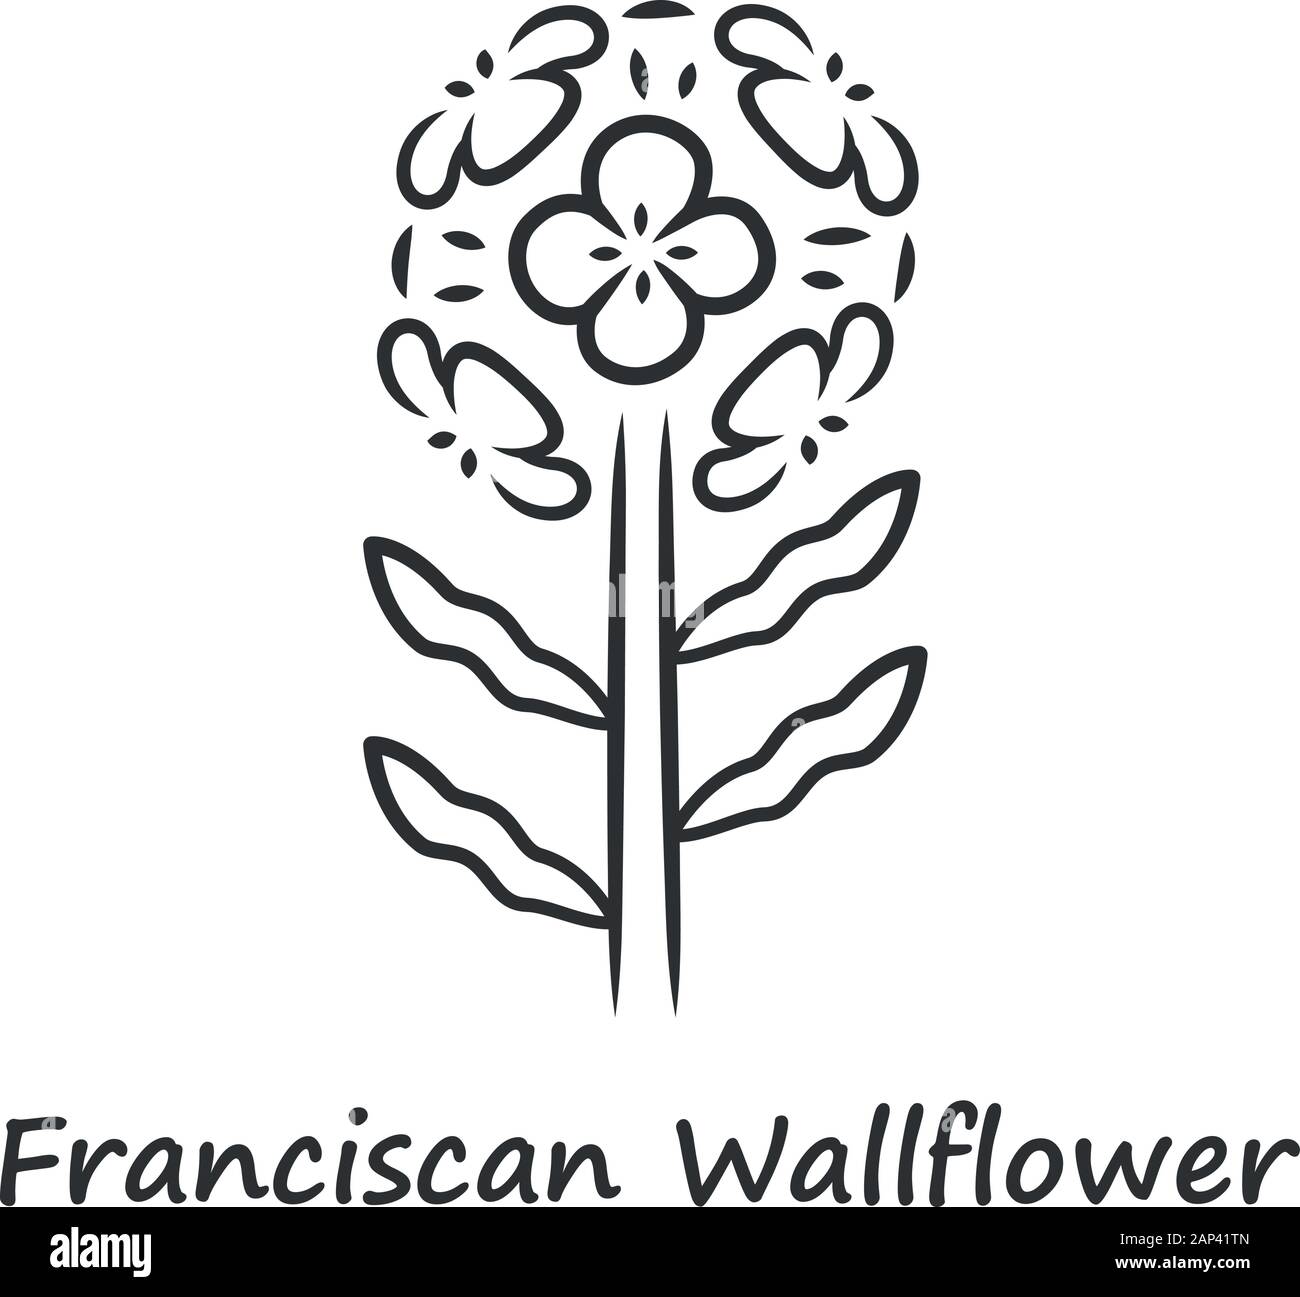 Franciscan wallflower linear icon. Garden flowering plant with name inscription. Erysimum franciscanum inflorescence. Thin line illustration. Contour Stock Vector